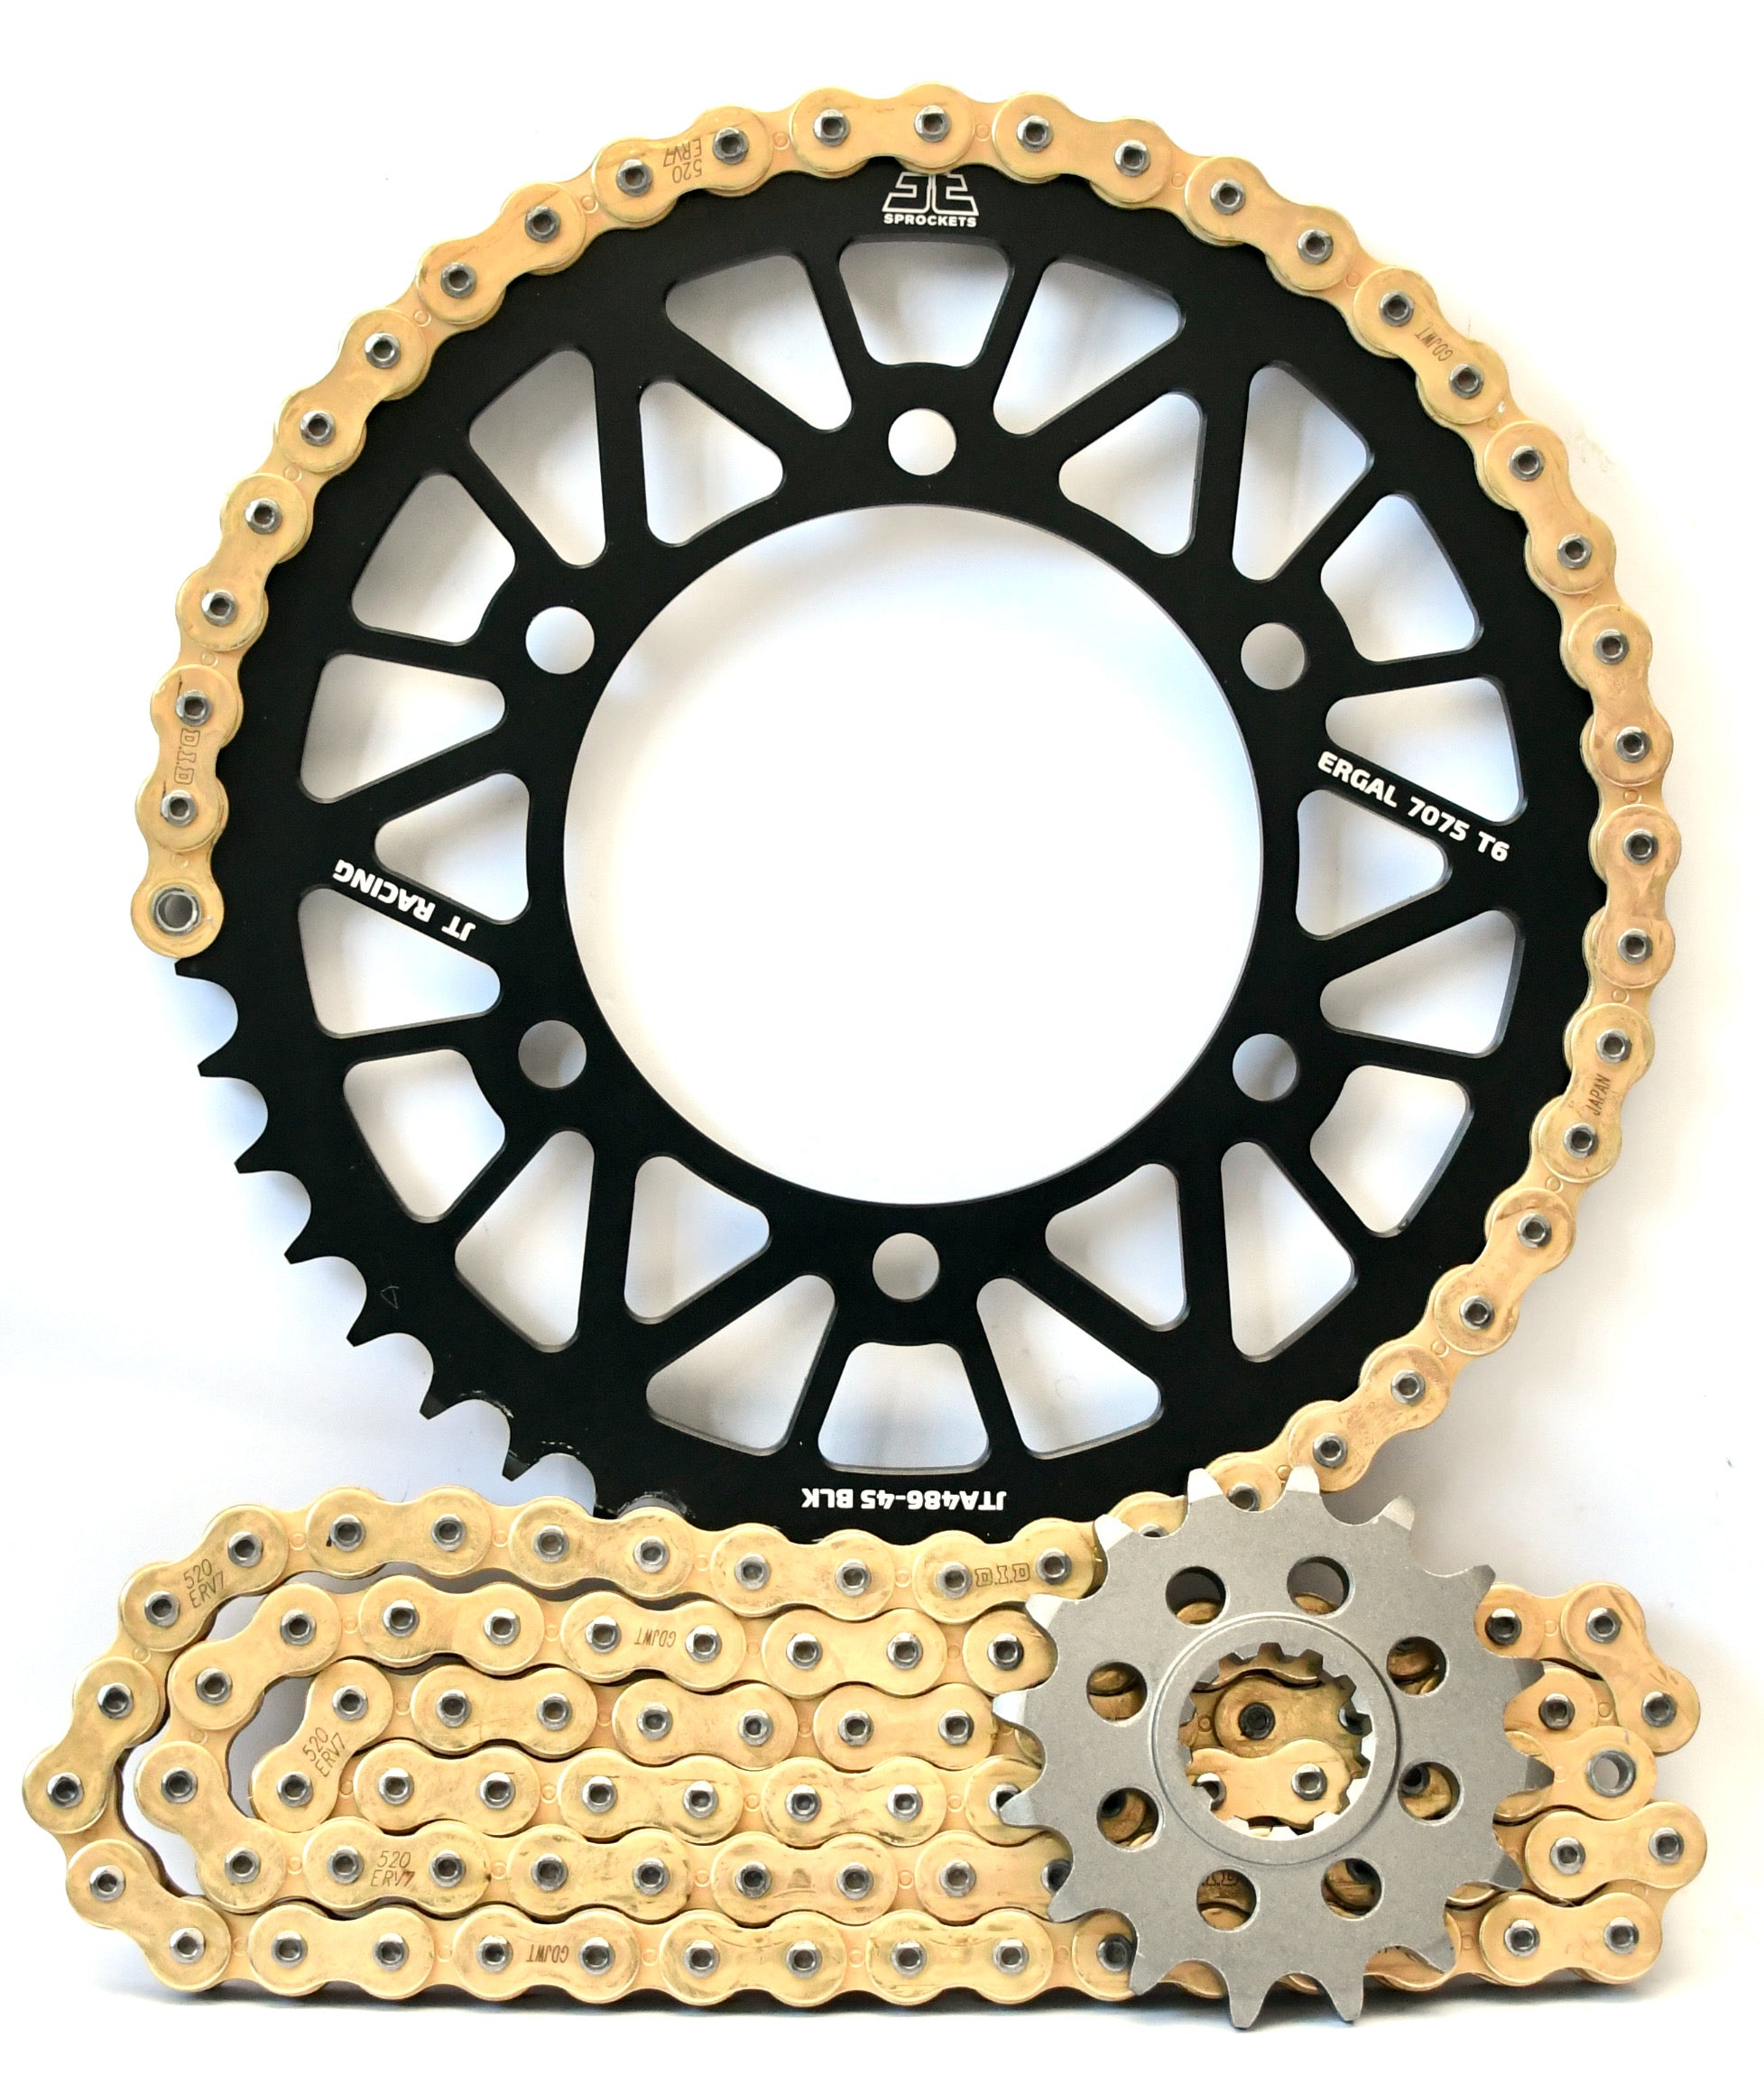 JT Racelite and DID 520 Conversion Chain & Sprocket Kit for Kawasaki ZX-10R 2011-2015 - Standard Gearing